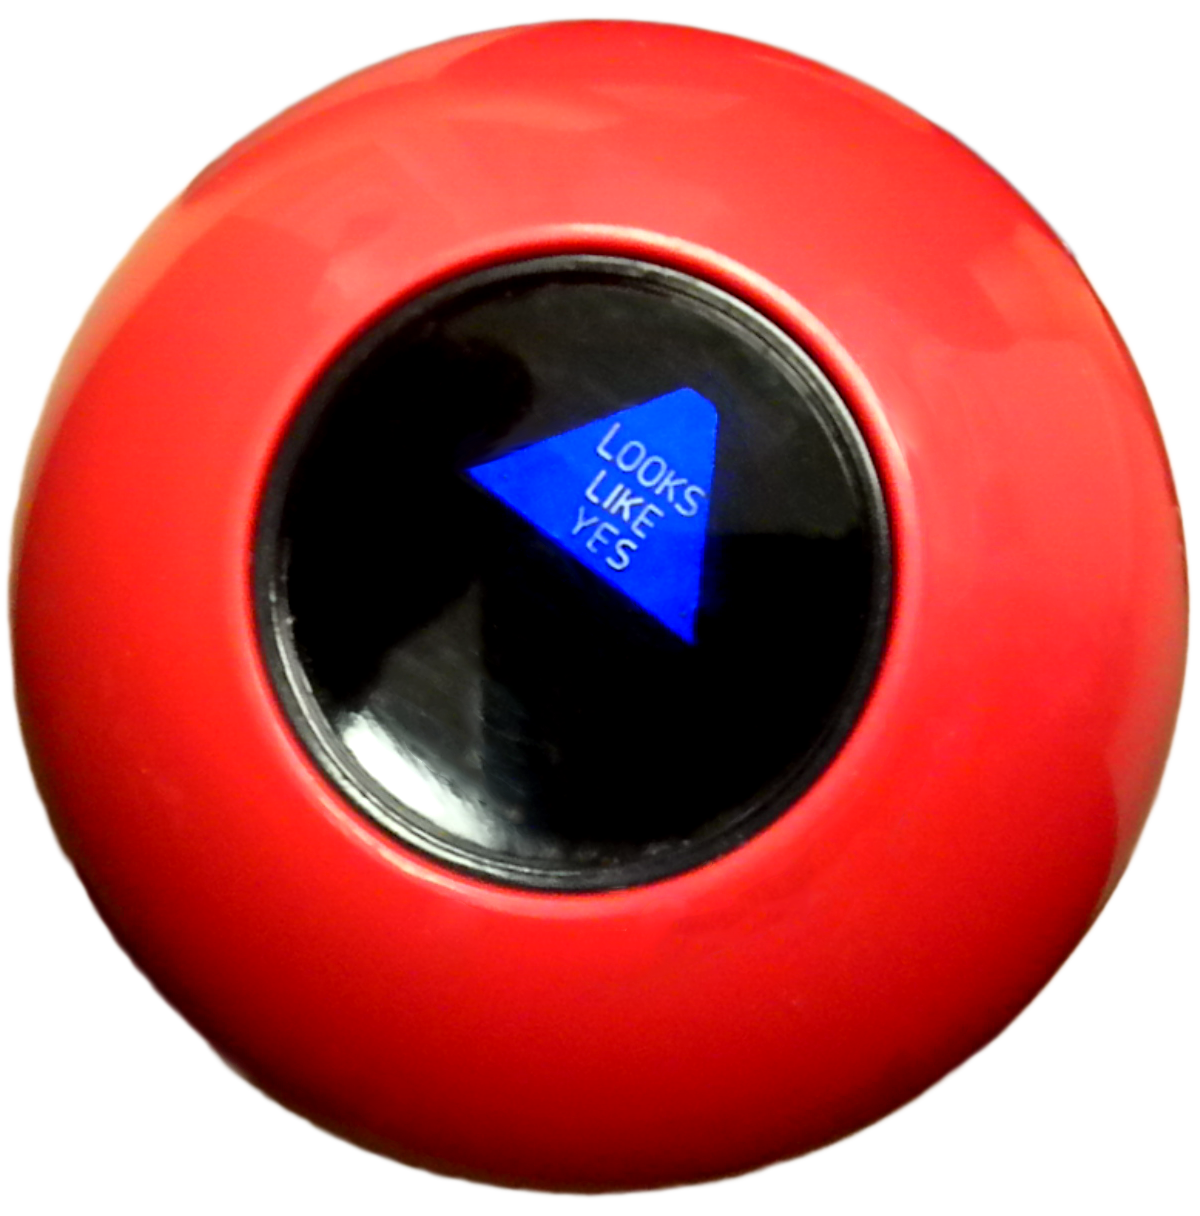 eIGHT bALL2.png